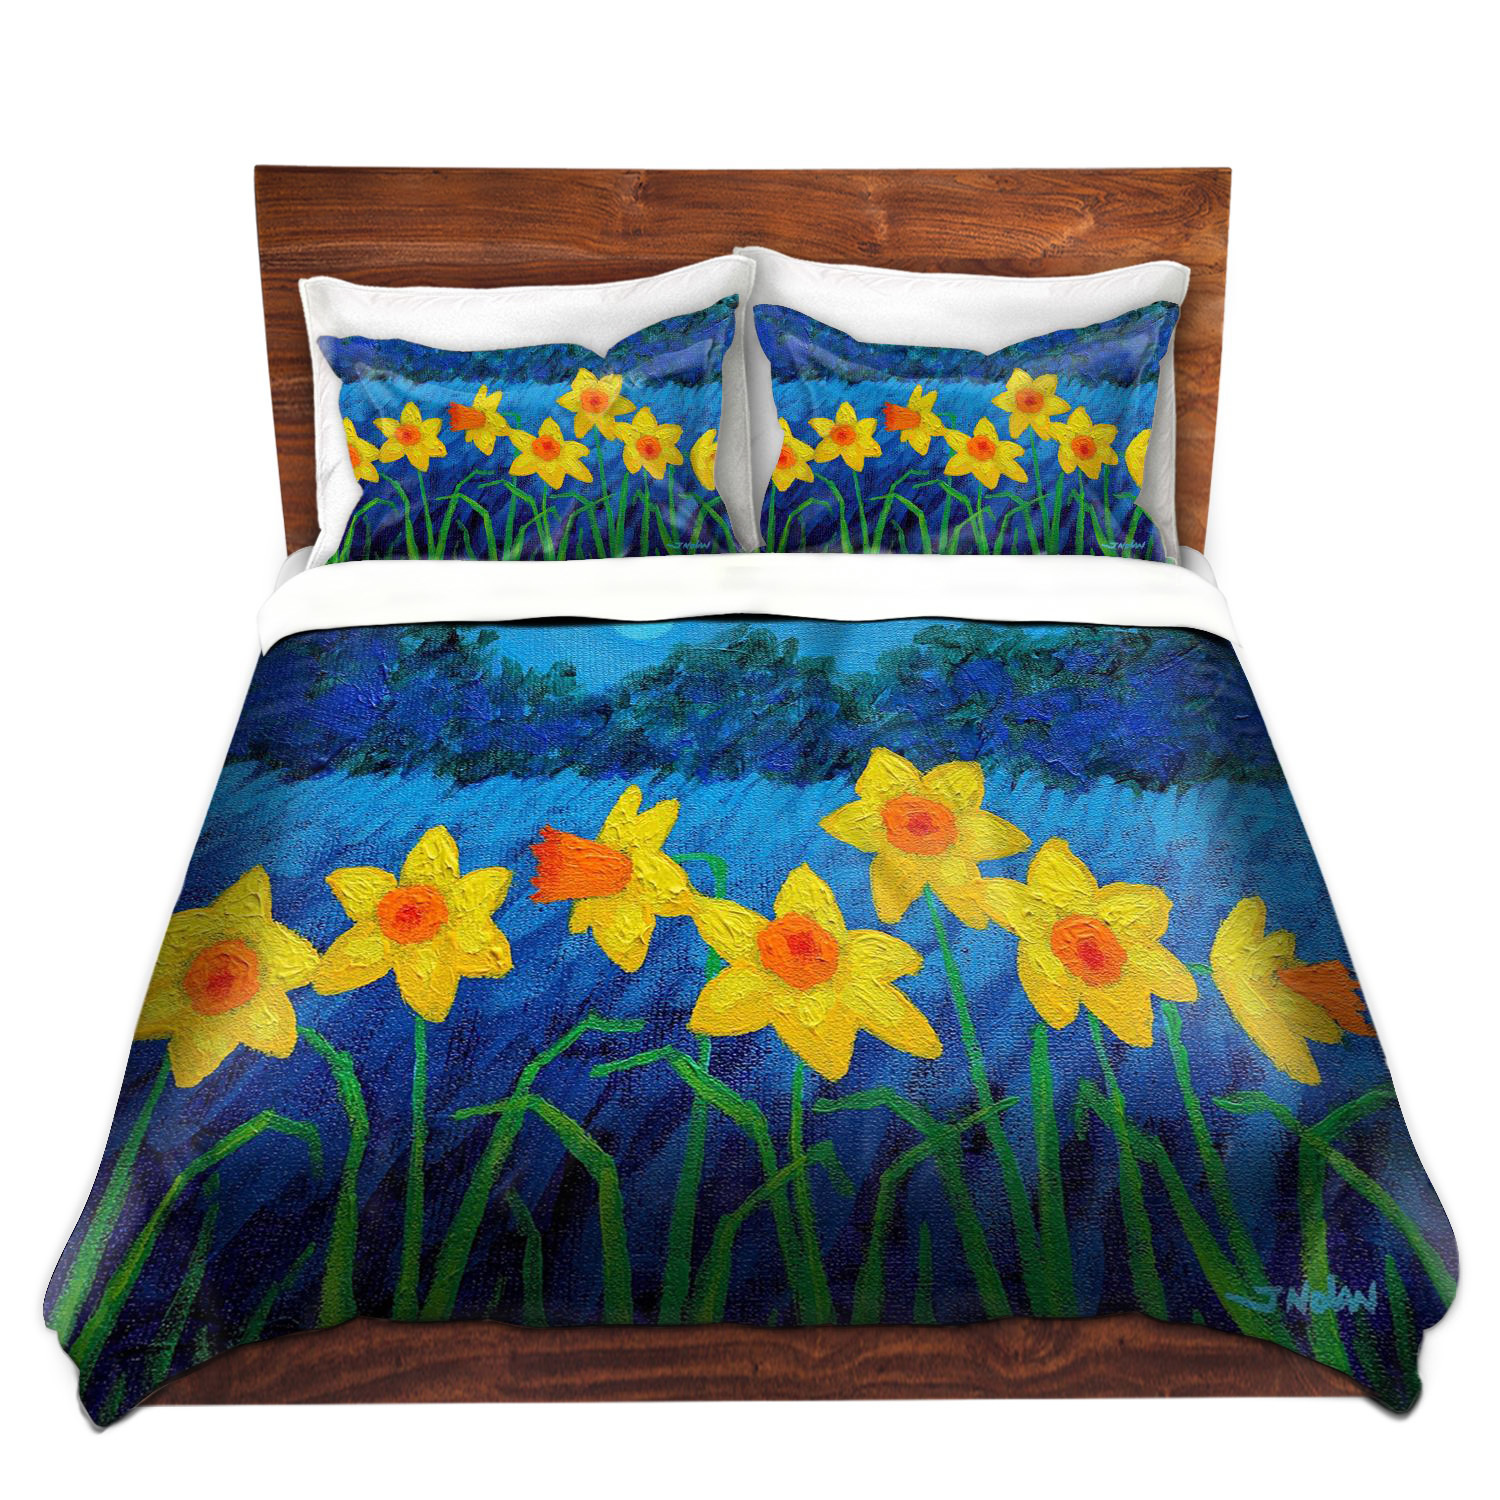 Duvet Cover And Sham Set - Dianoche Designs By John Nolan - Moonlit Daffodils